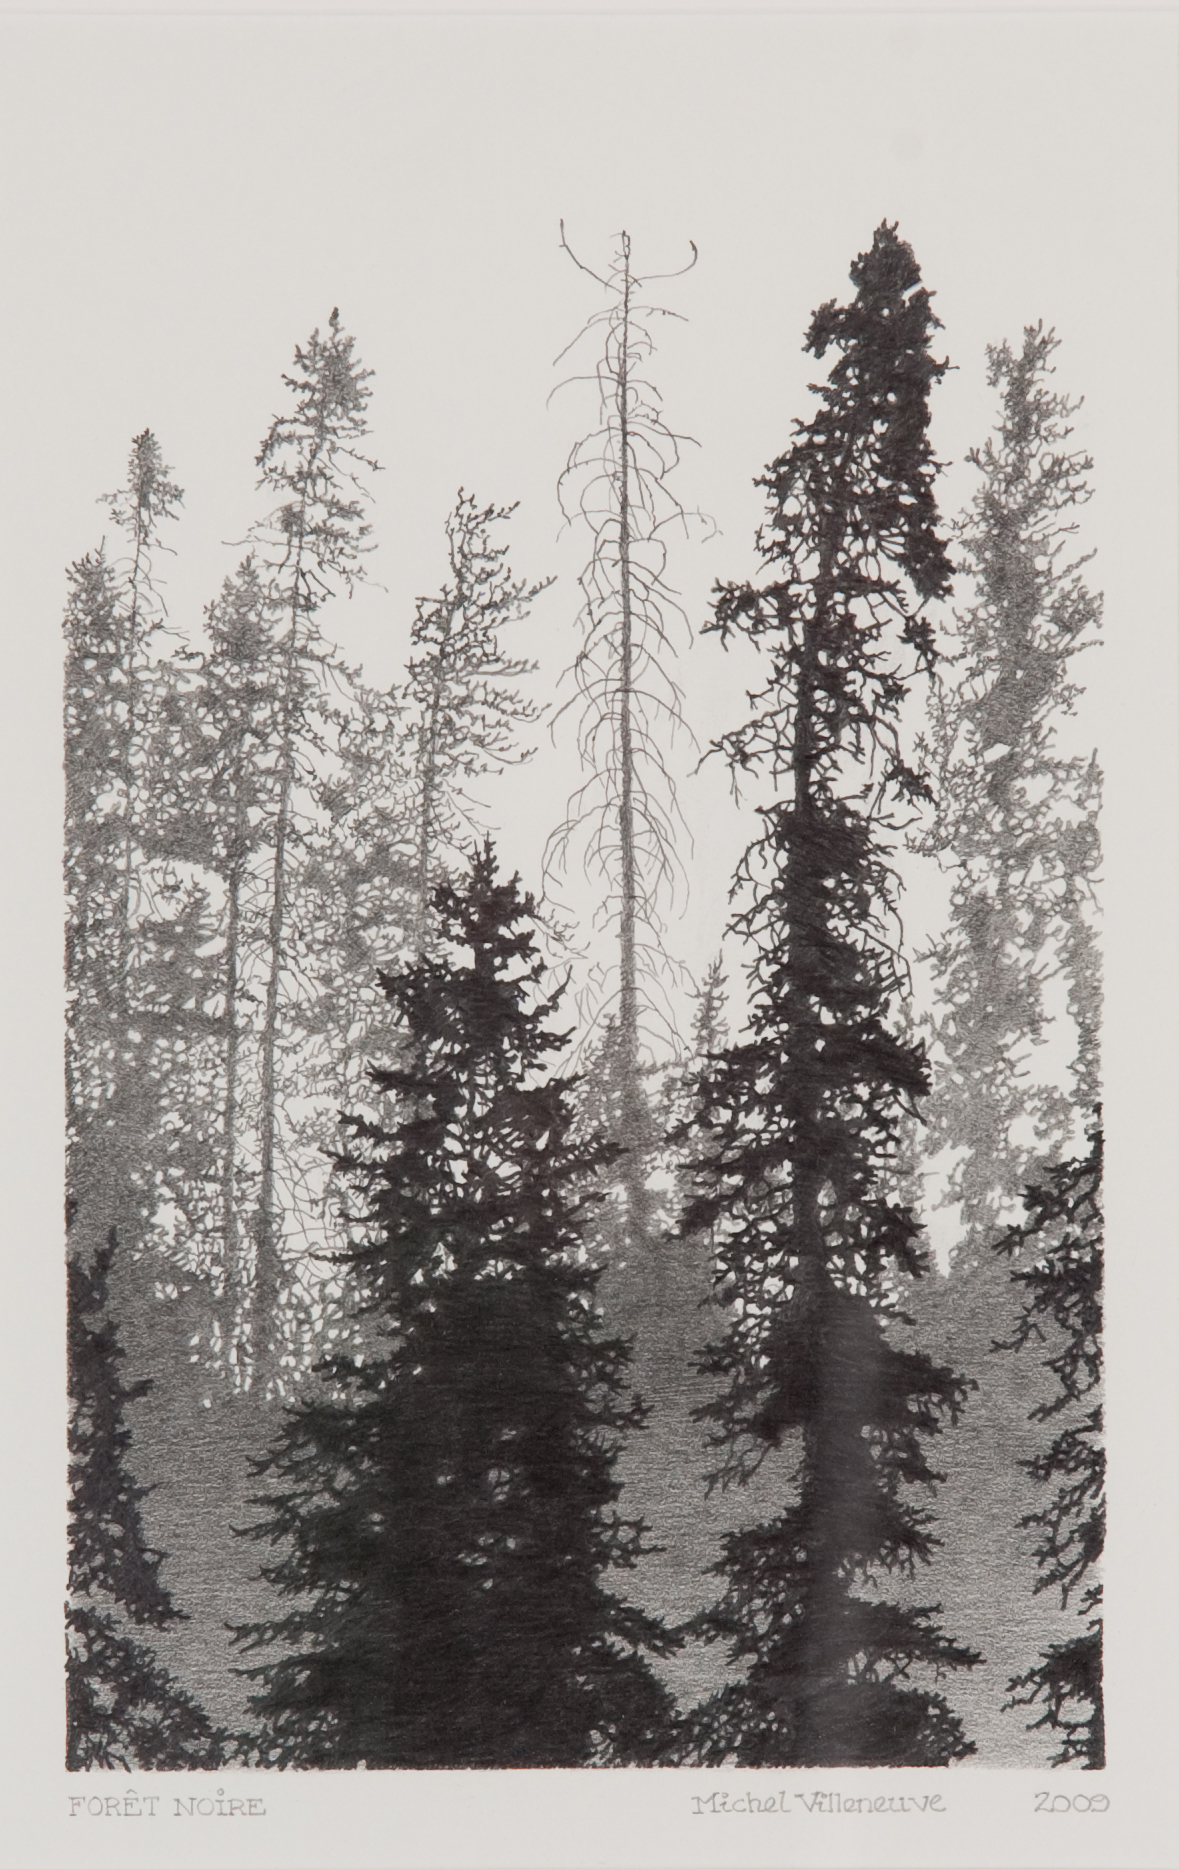 Black and white drawing representing two conifers in the foreground, in front of a forest of conifers in the background.